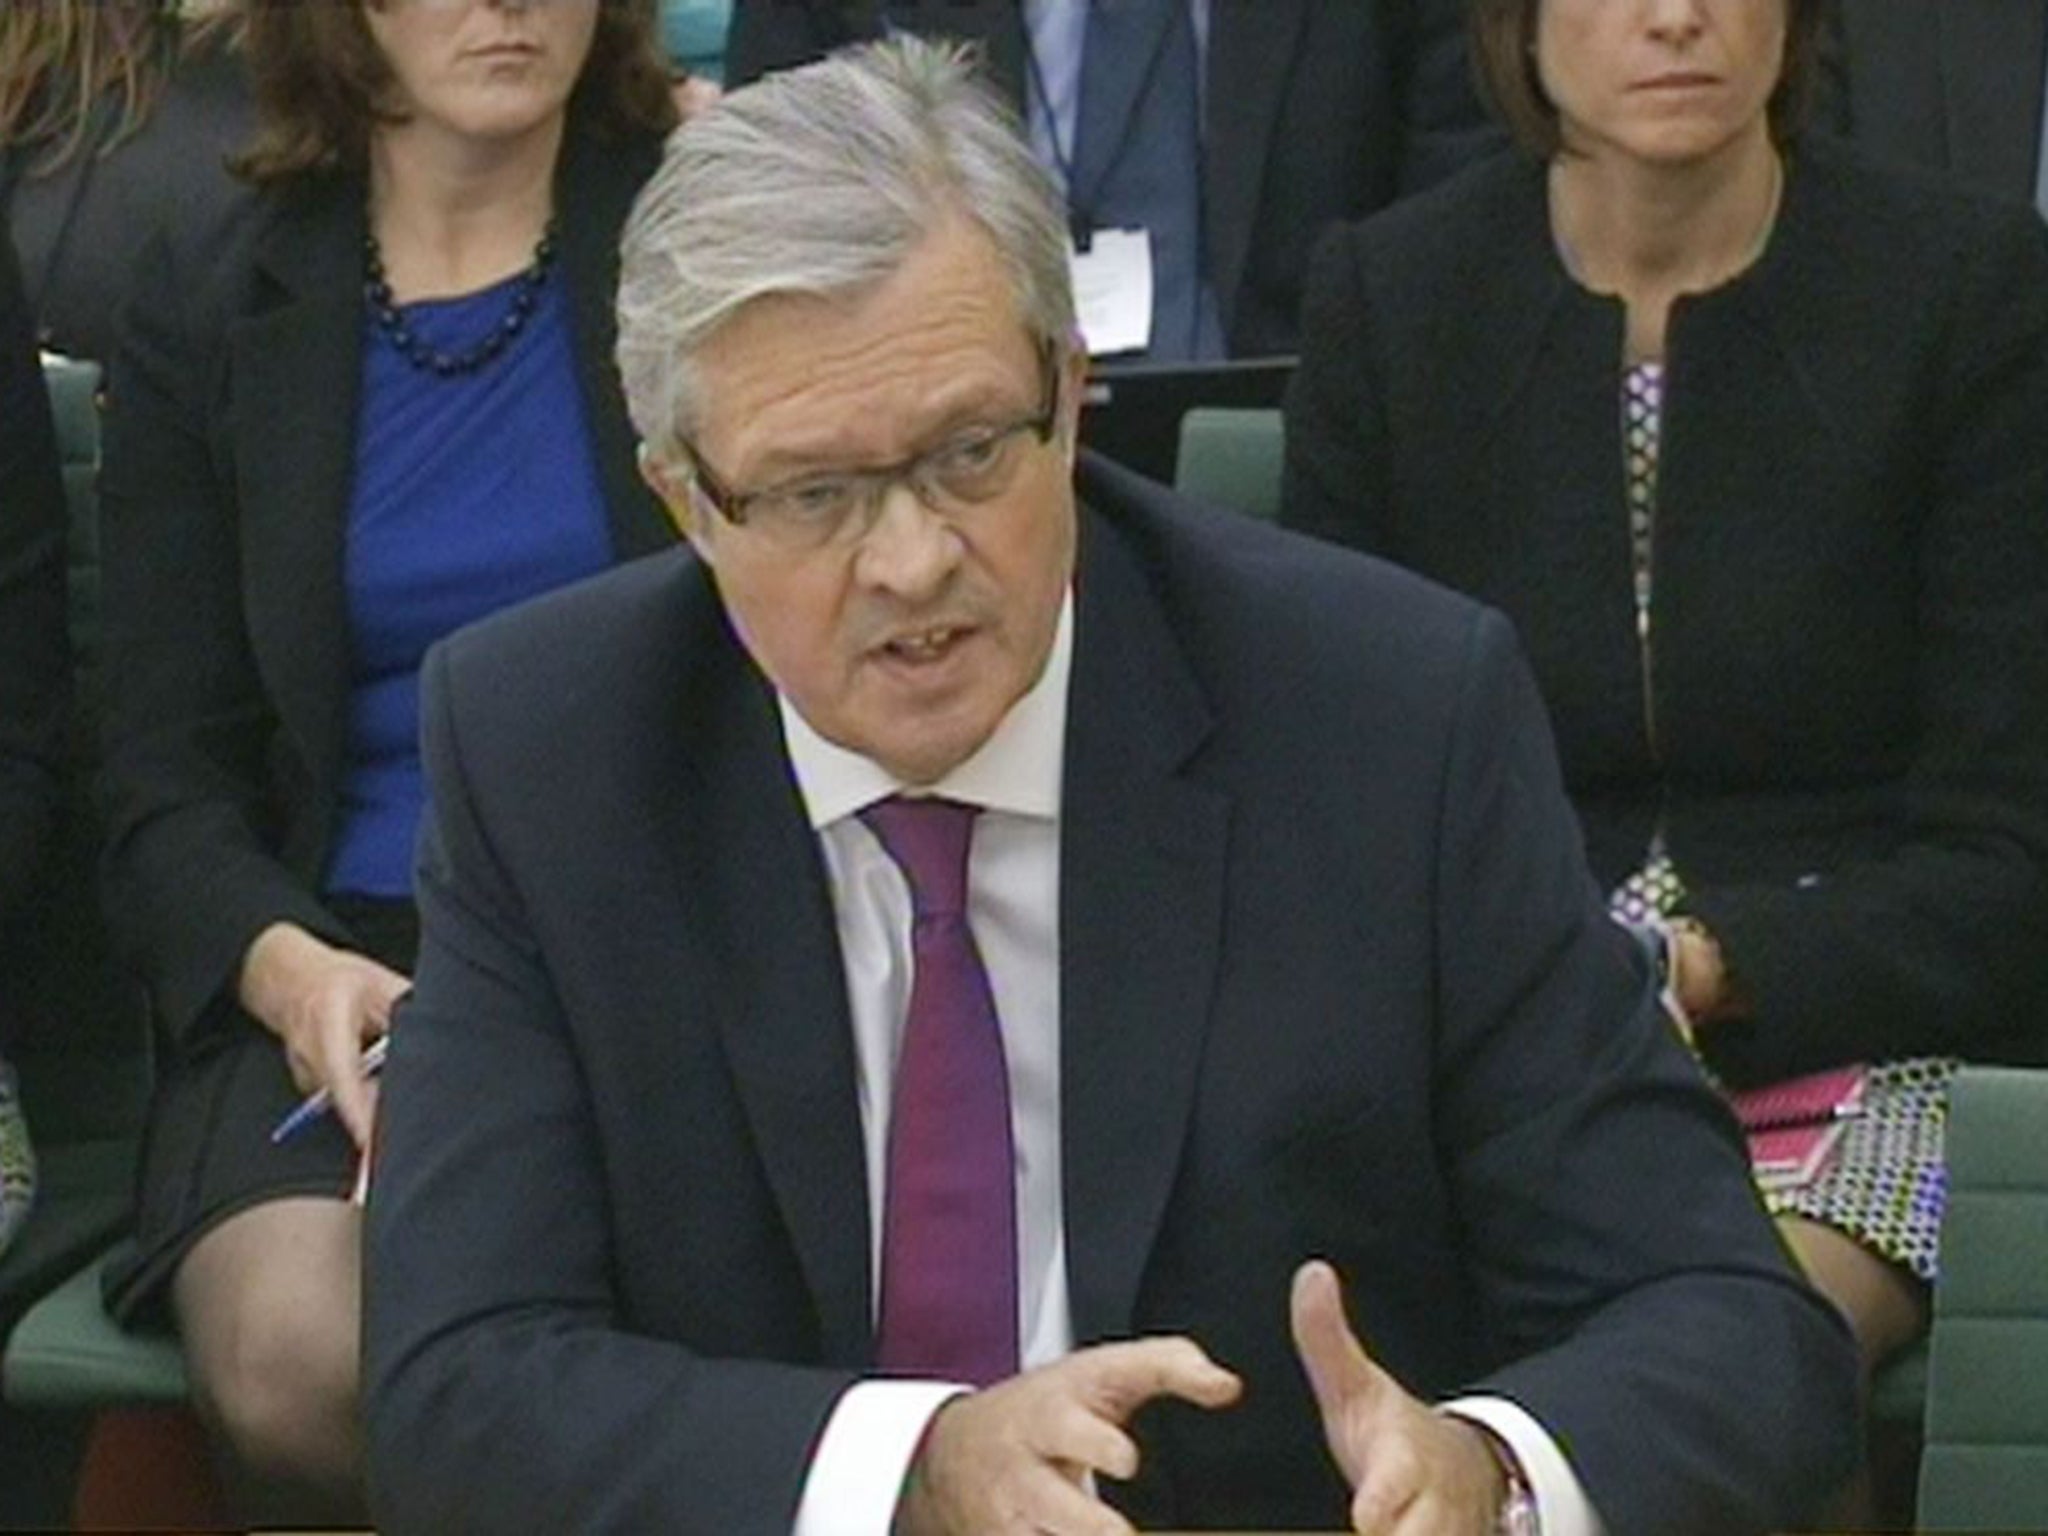 Paul Willis, the Volkswagen chief executive in the UK, spoke before the Environmental Audit Committee on Thursday morning